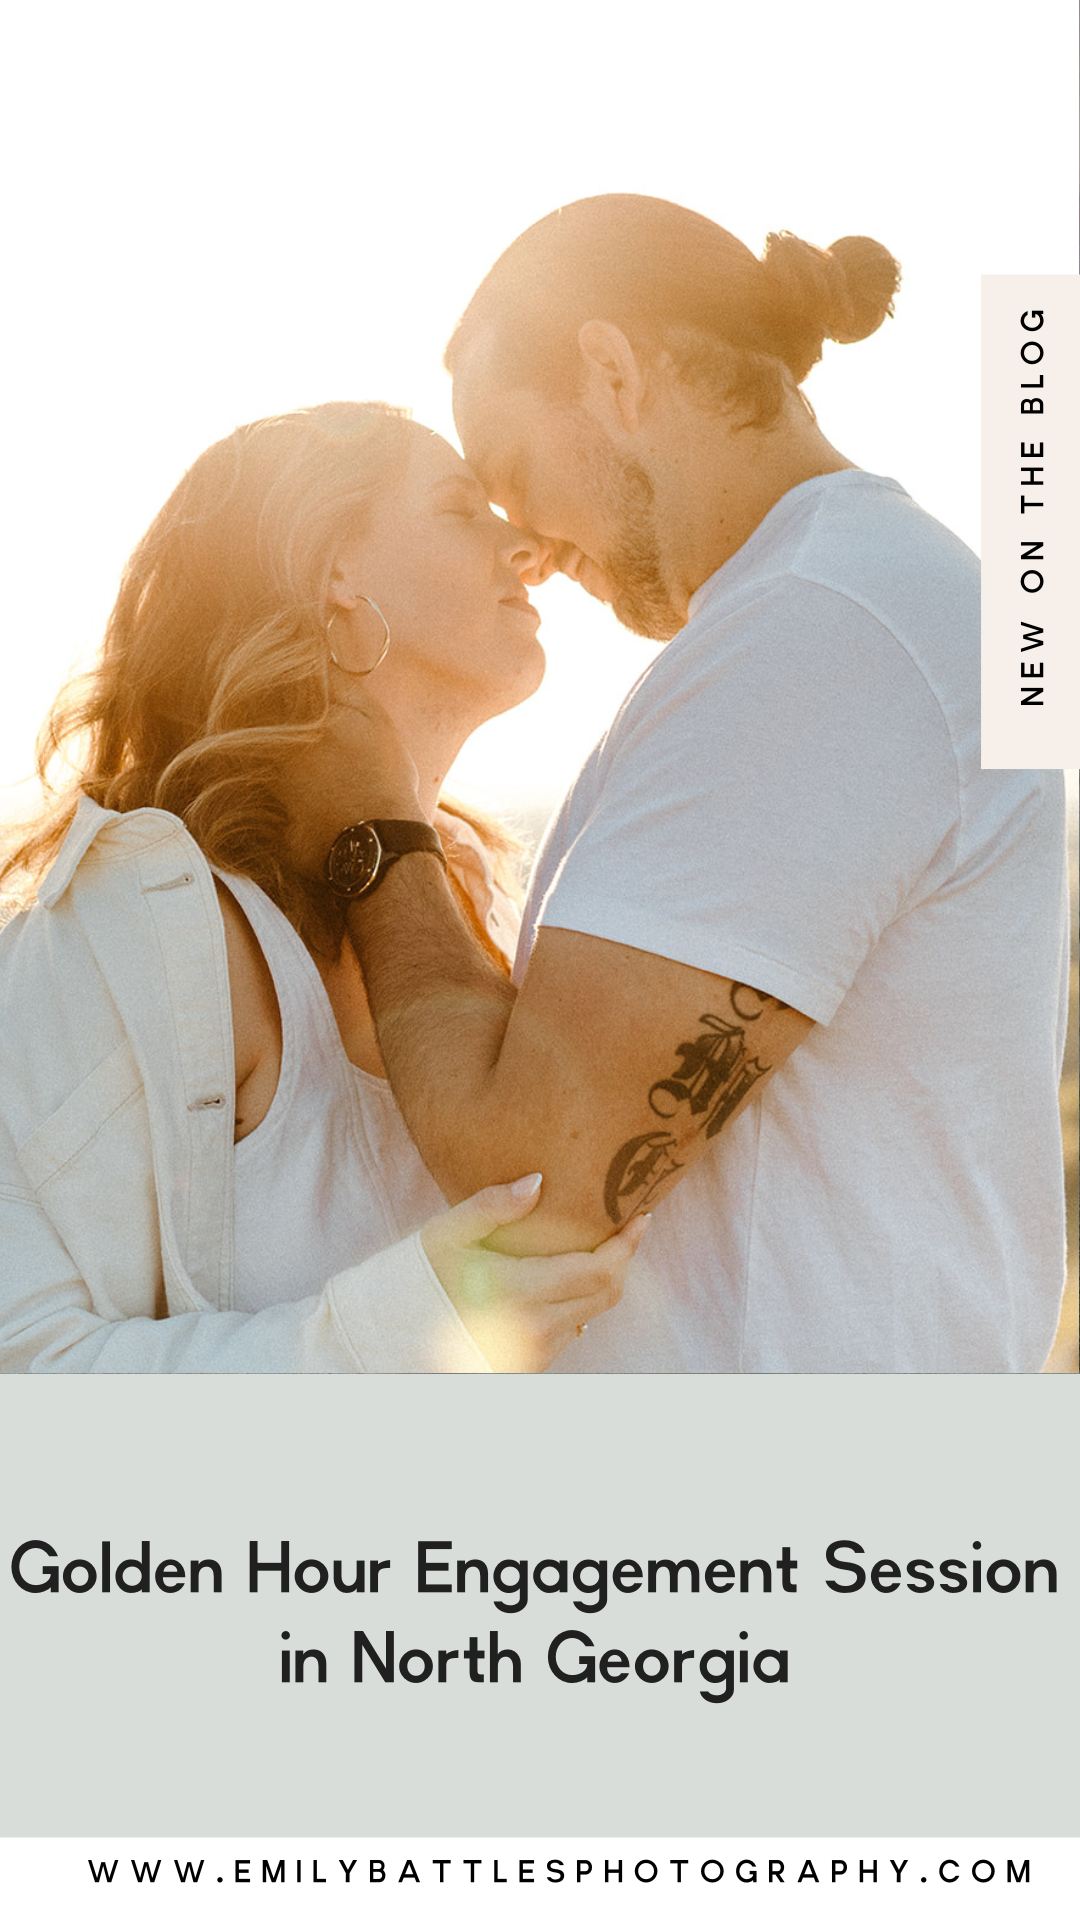 Golden Hour Engagement Session in North Georgia